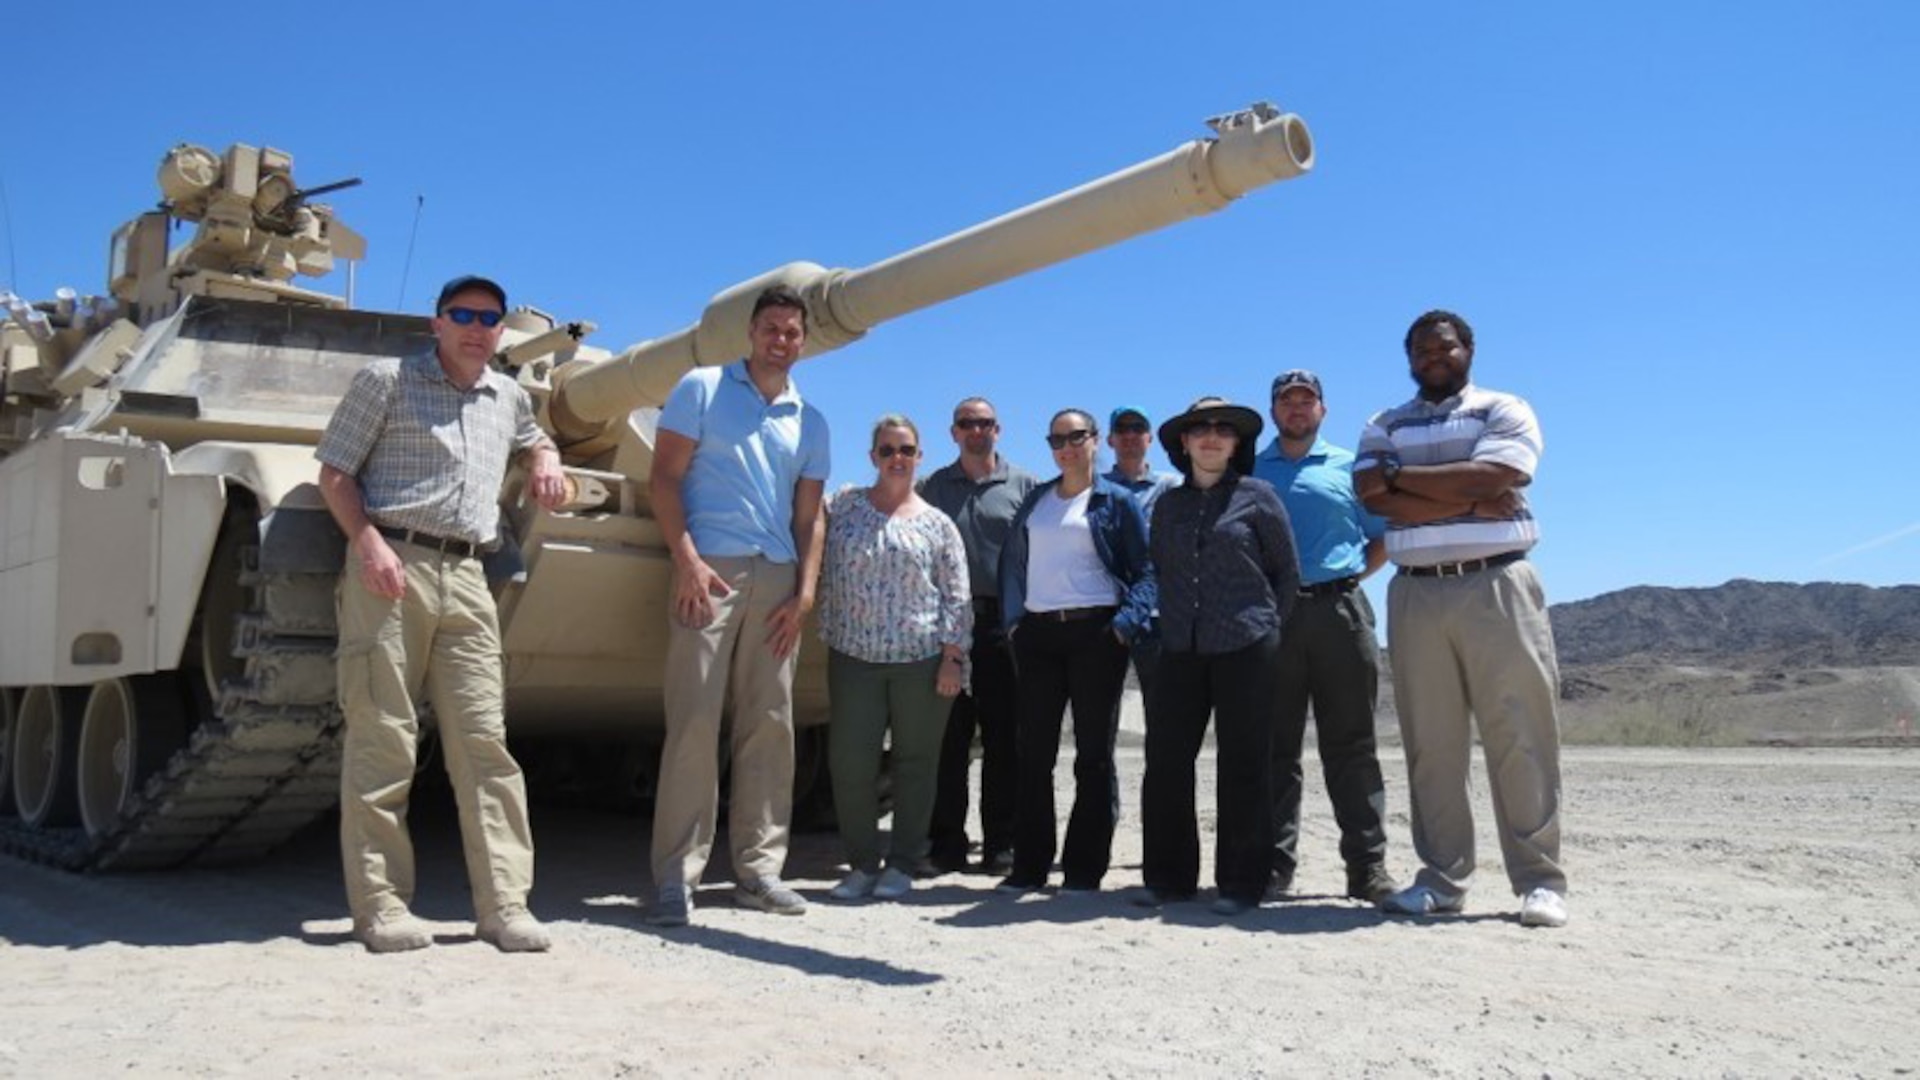 Nine people stand in front of an Abrams tank on a sunny day in the desert.